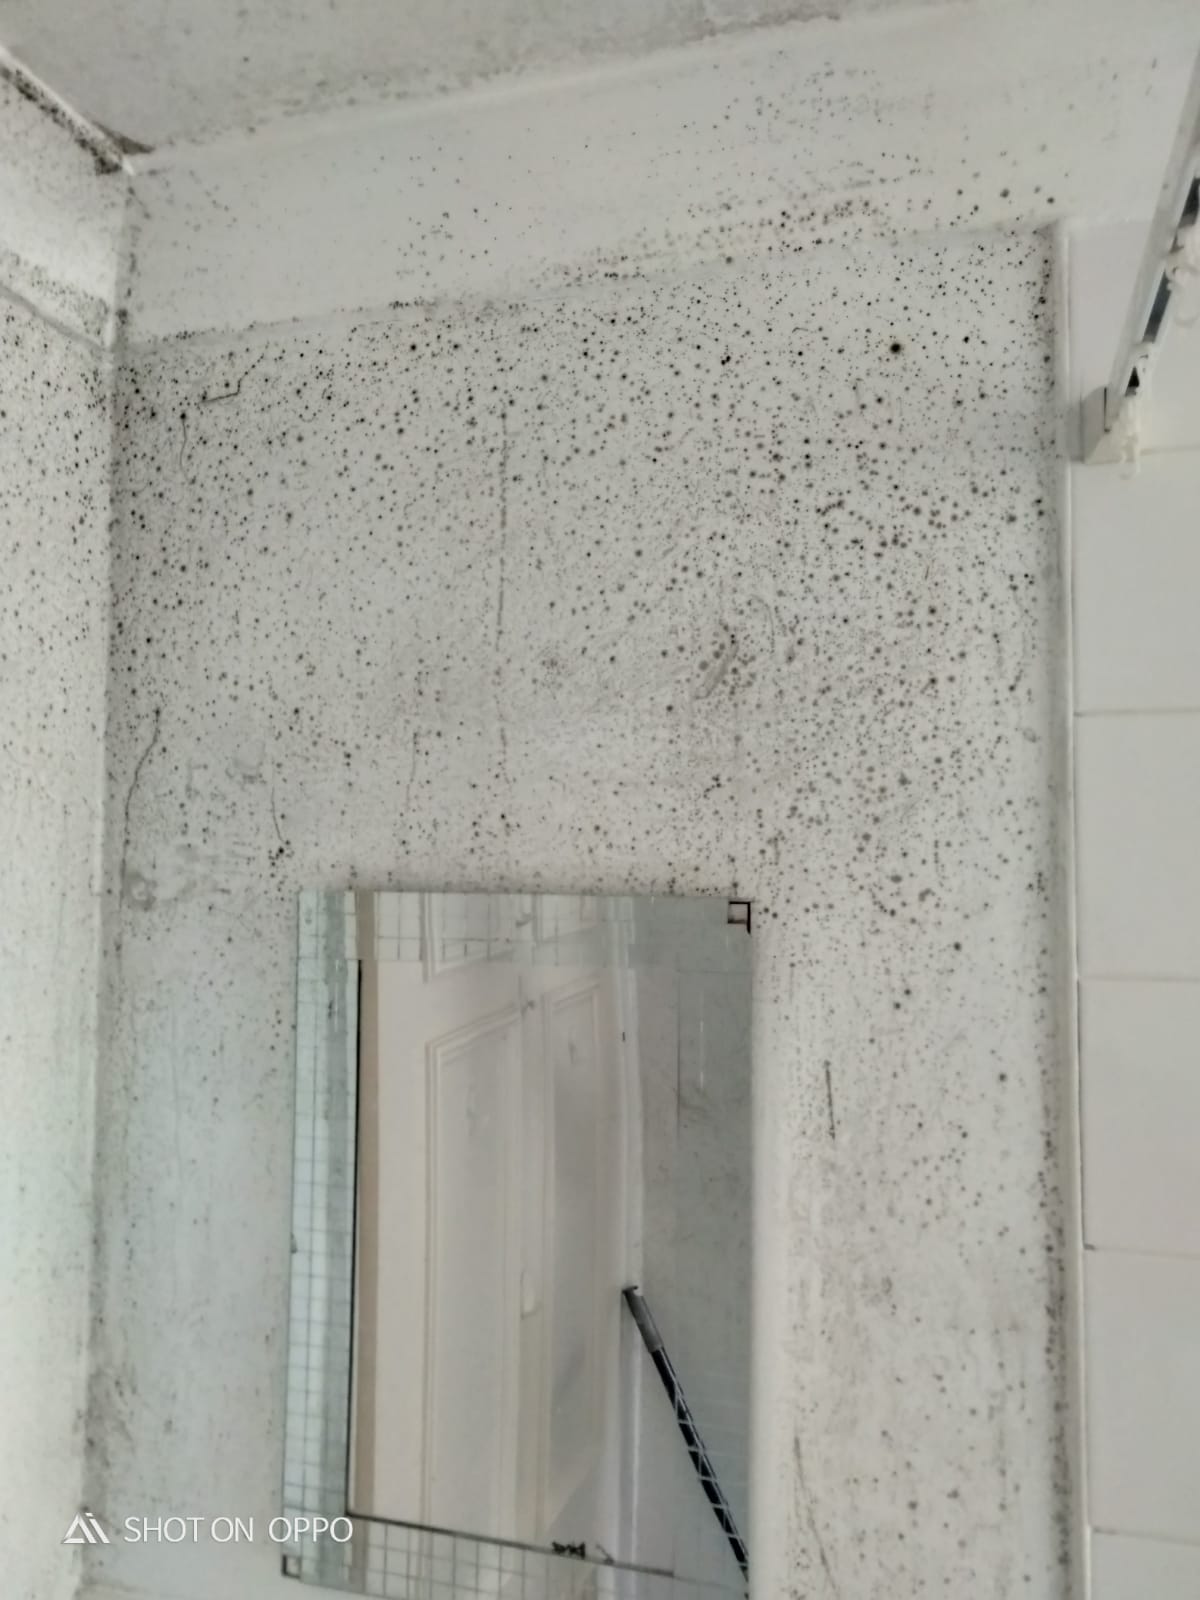 Mr Hamid’s flat was beset by problems with black mould